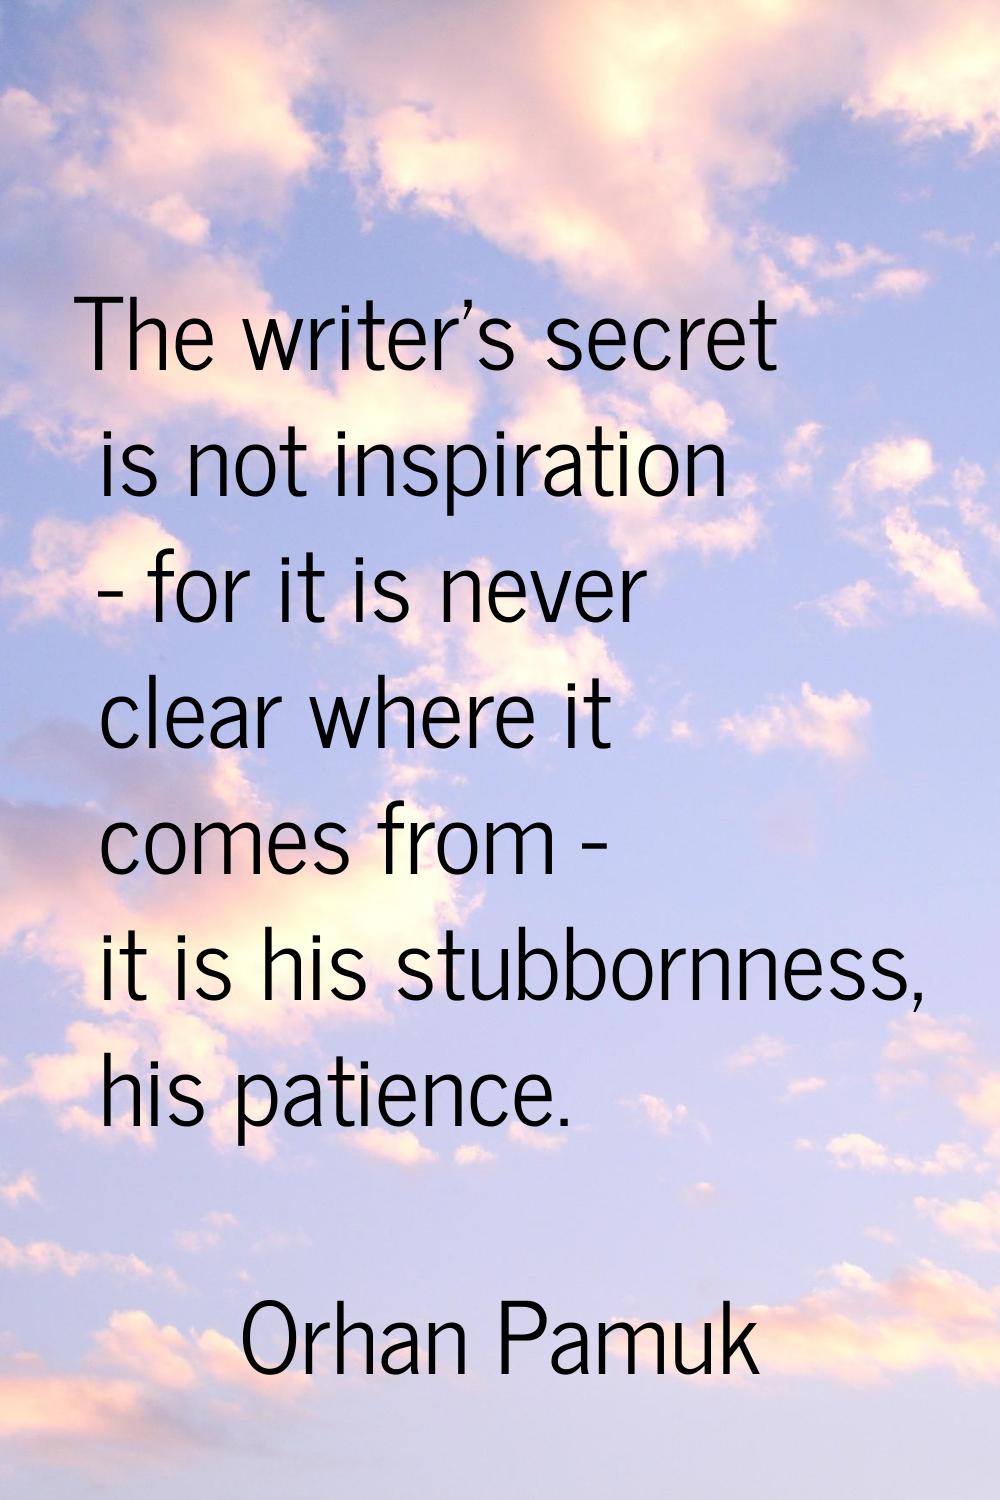 The writer's secret is not inspiration - for it is never clear where it comes from - it is his stub